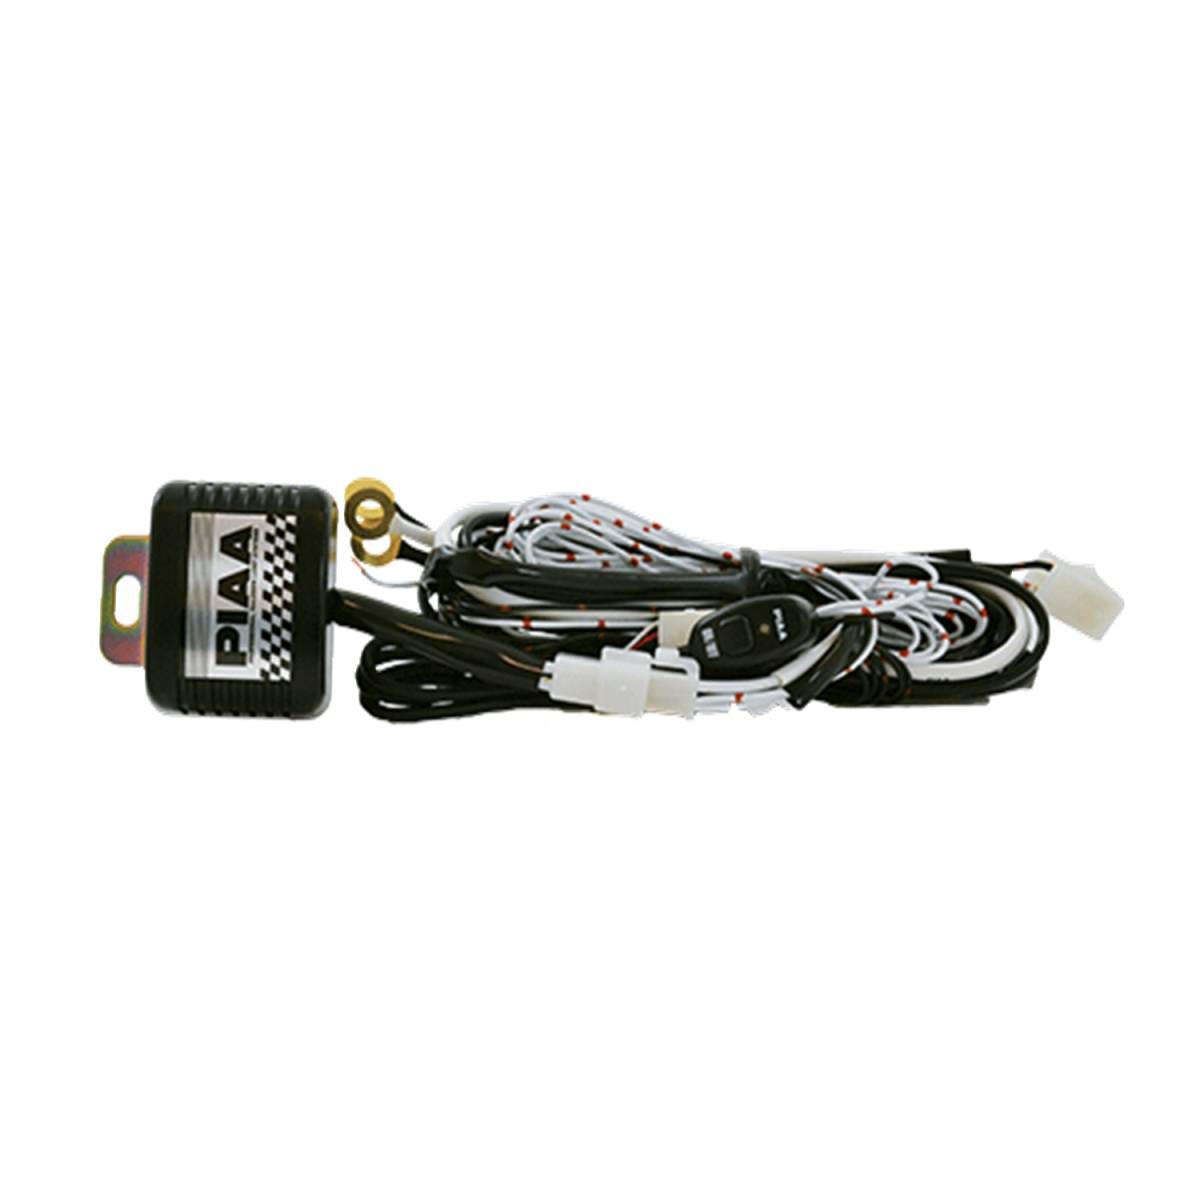 Replacement Wiring Harness for PIAA 520 Lamp Light Kit PN 34260